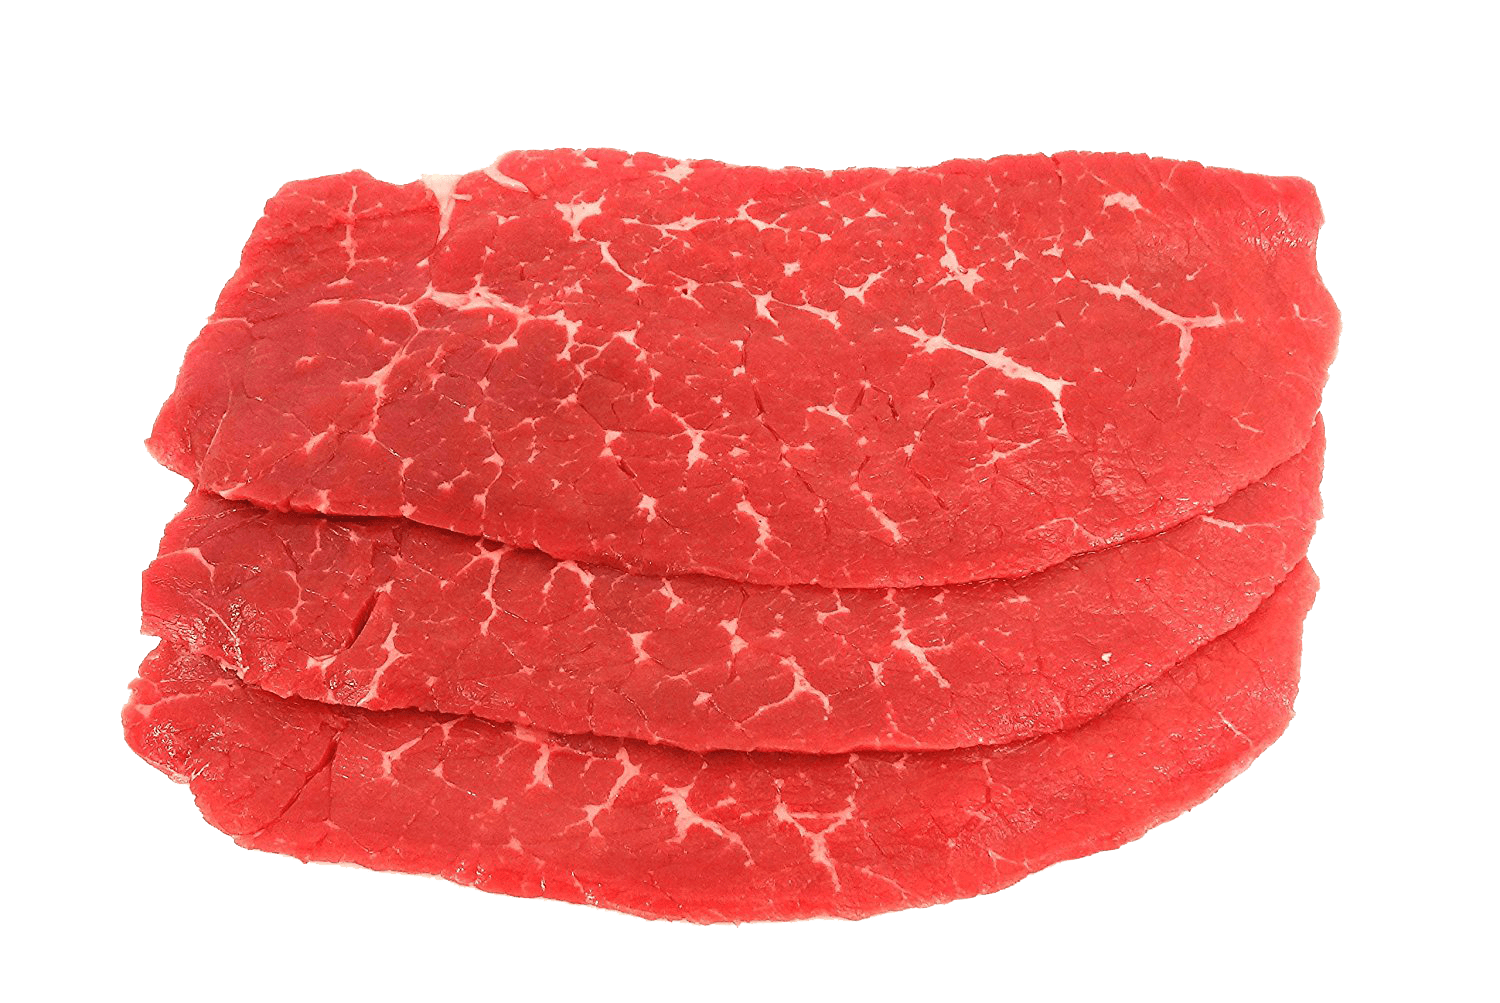 Fresh Local Meat Delivery - Black Angus - Top Round - Beef Cutlets (6 Or 12 Cutlets)  Includes Shipping